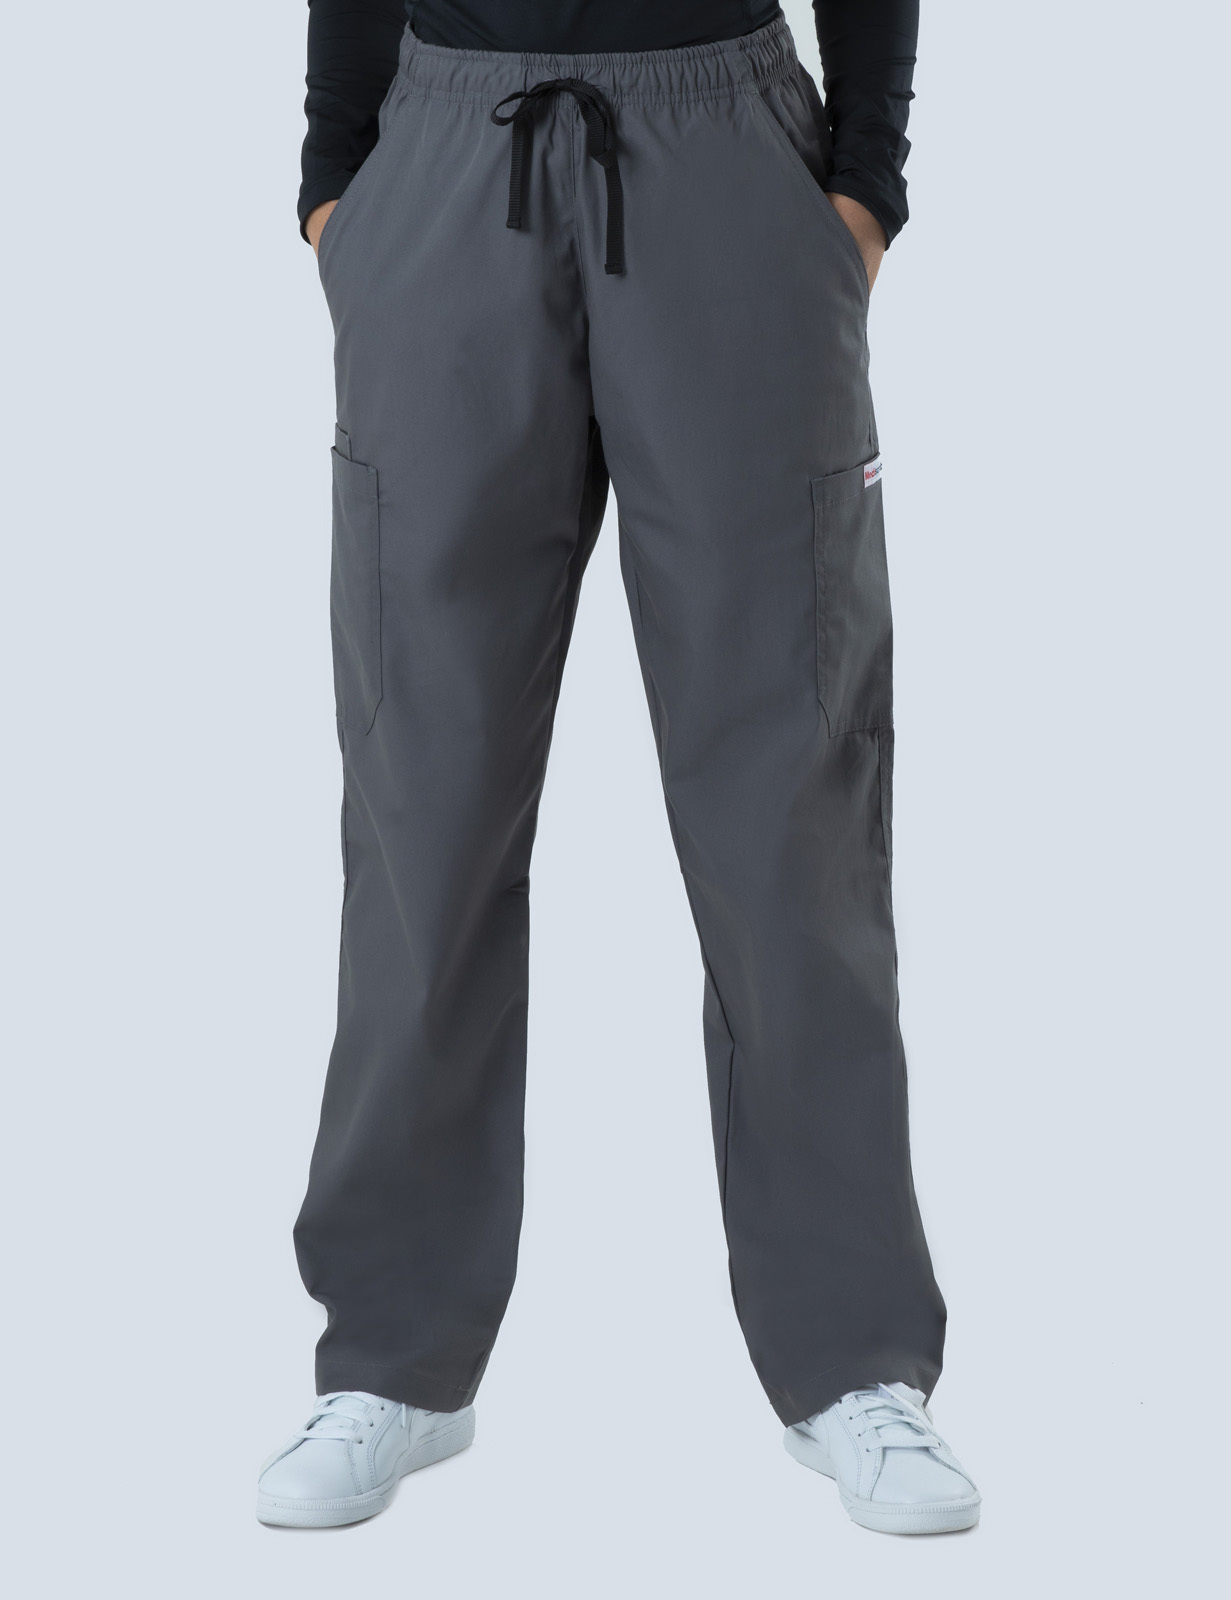 Cargo Pants Bundle - Pathology North - Coffs Harbour (pants only)(Cargo Pants in Steel Grey)